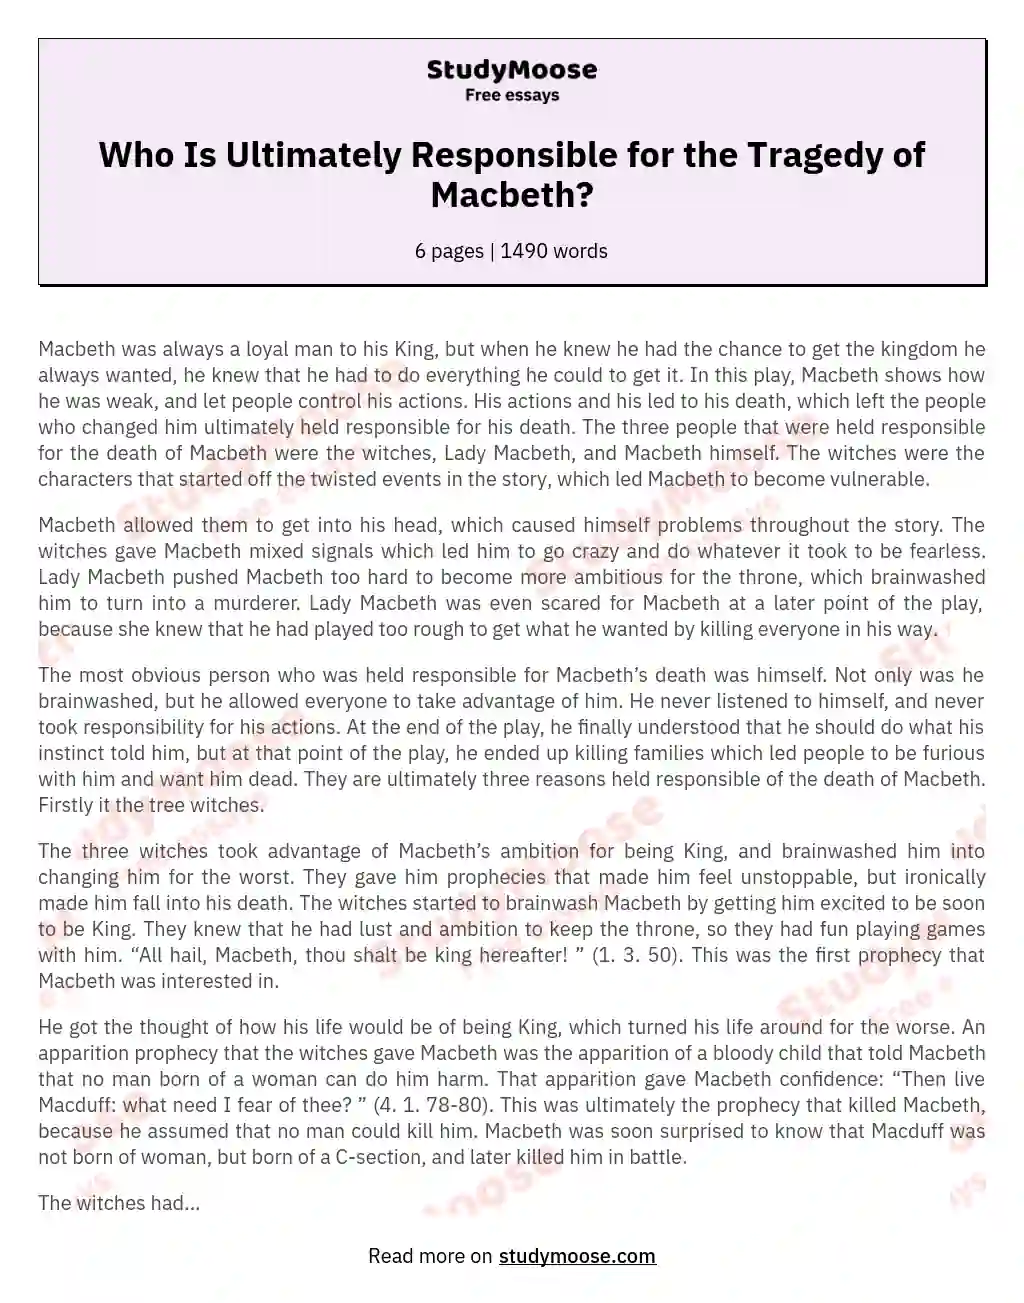 Who Is Ultimately Responsible for the Tragedy of Macbeth? essay